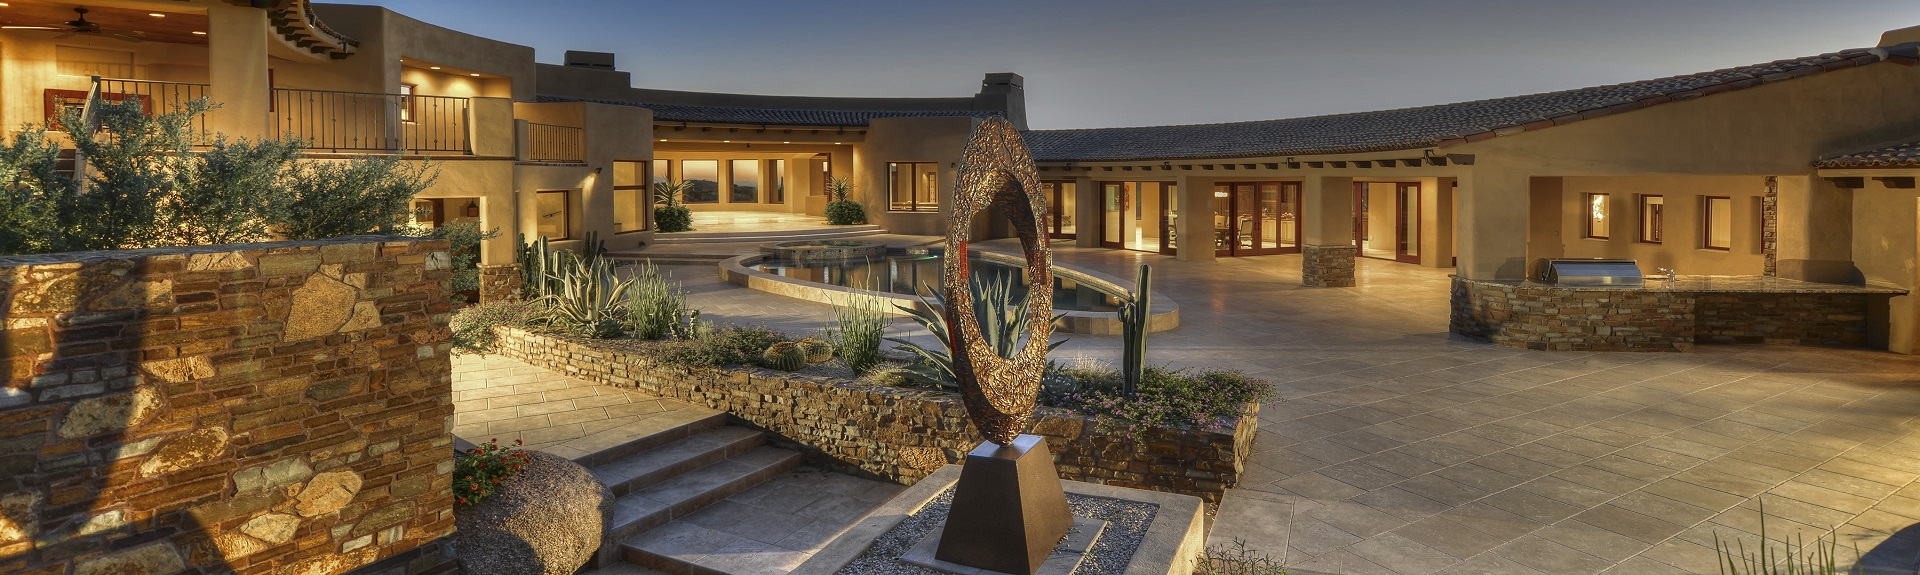 Scottsdale real estate luxury home magnificent front entrance